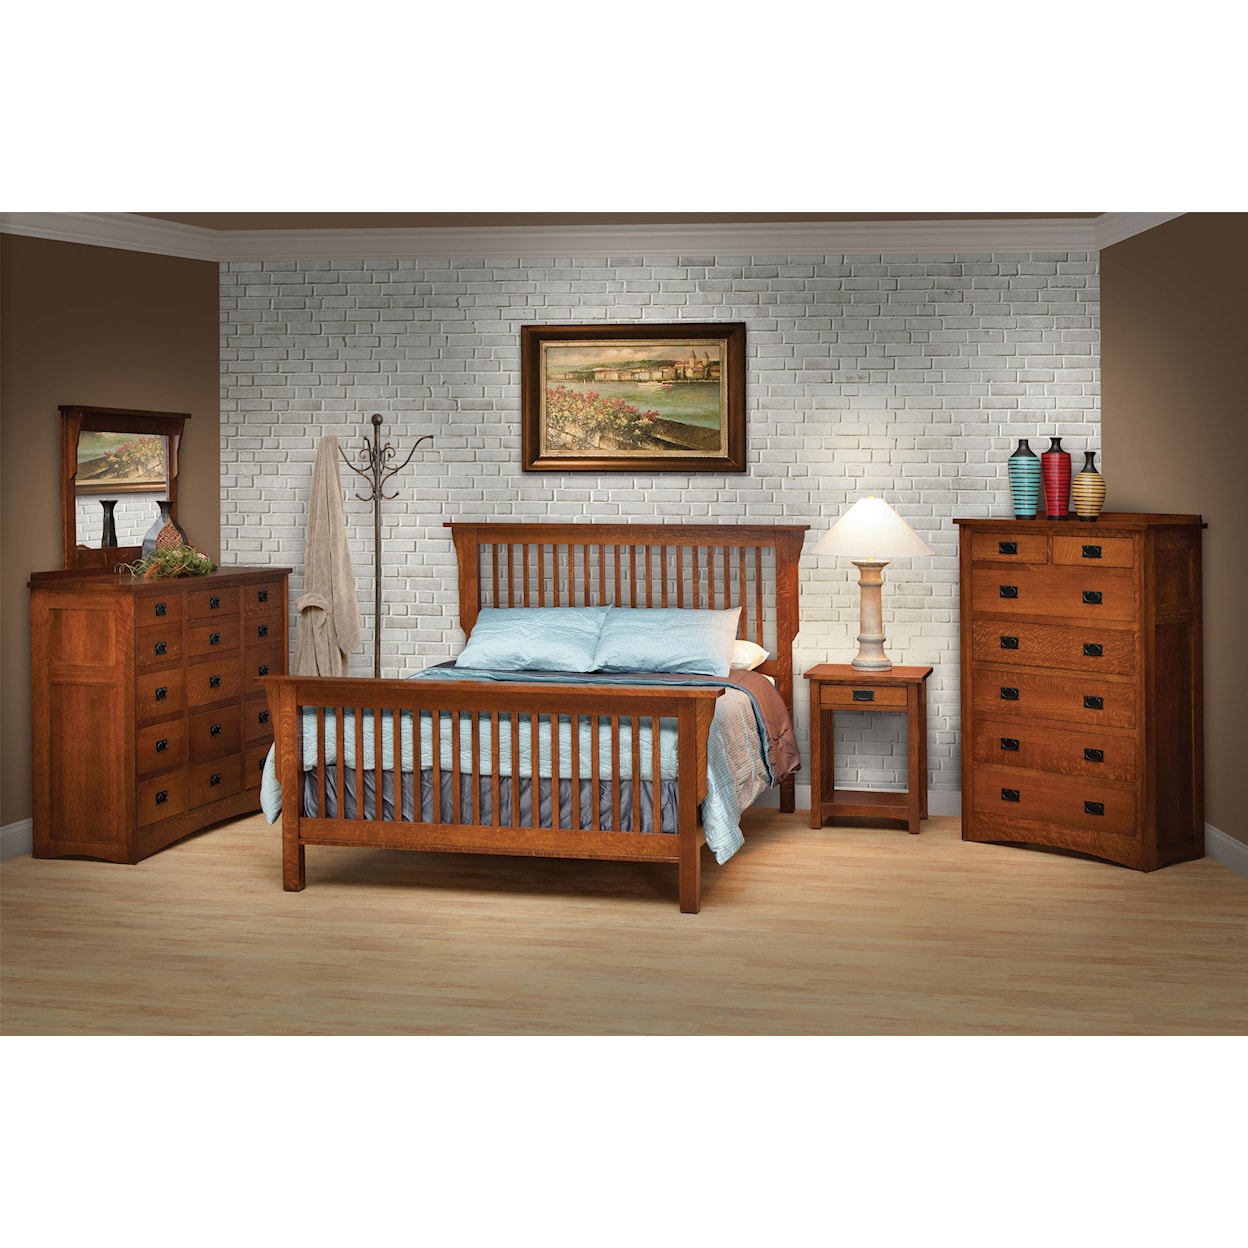 Daniel's Amish Mission Twin Bedroom Group